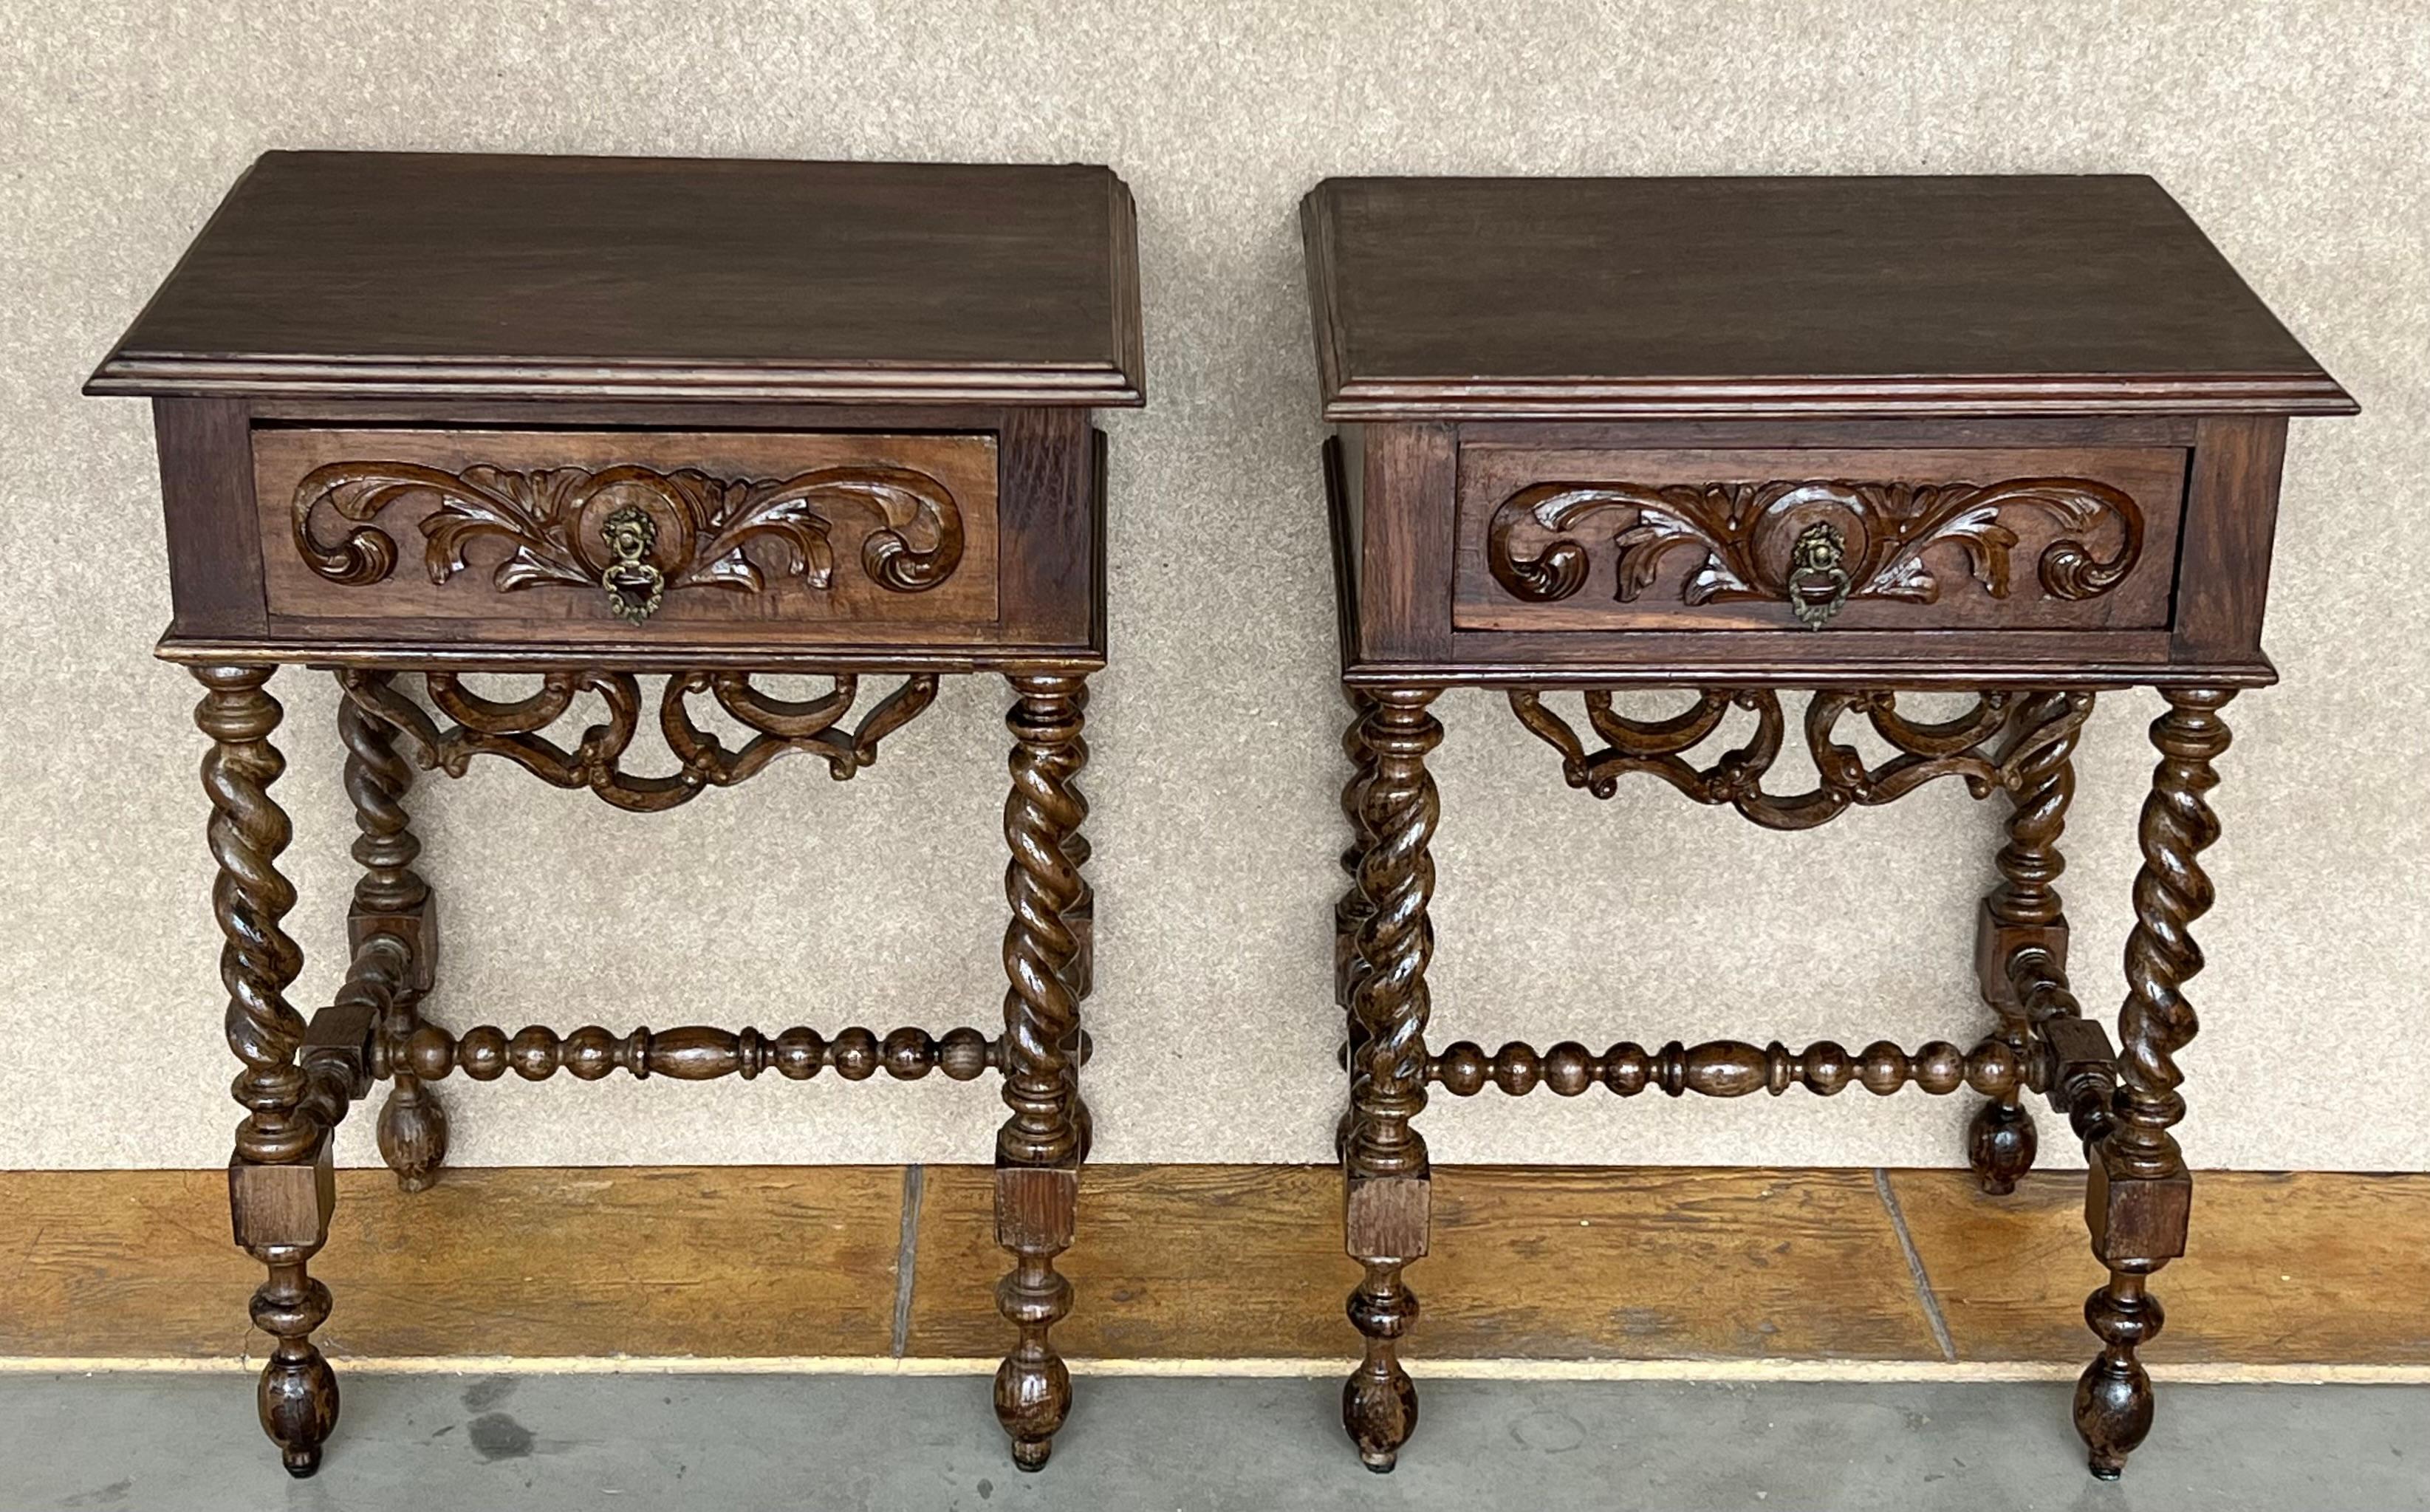 20th Century pair of solid carved French nightstands with turned columns and stretcher. 
It has one carved drawer with foliate reliefs and original hardware.